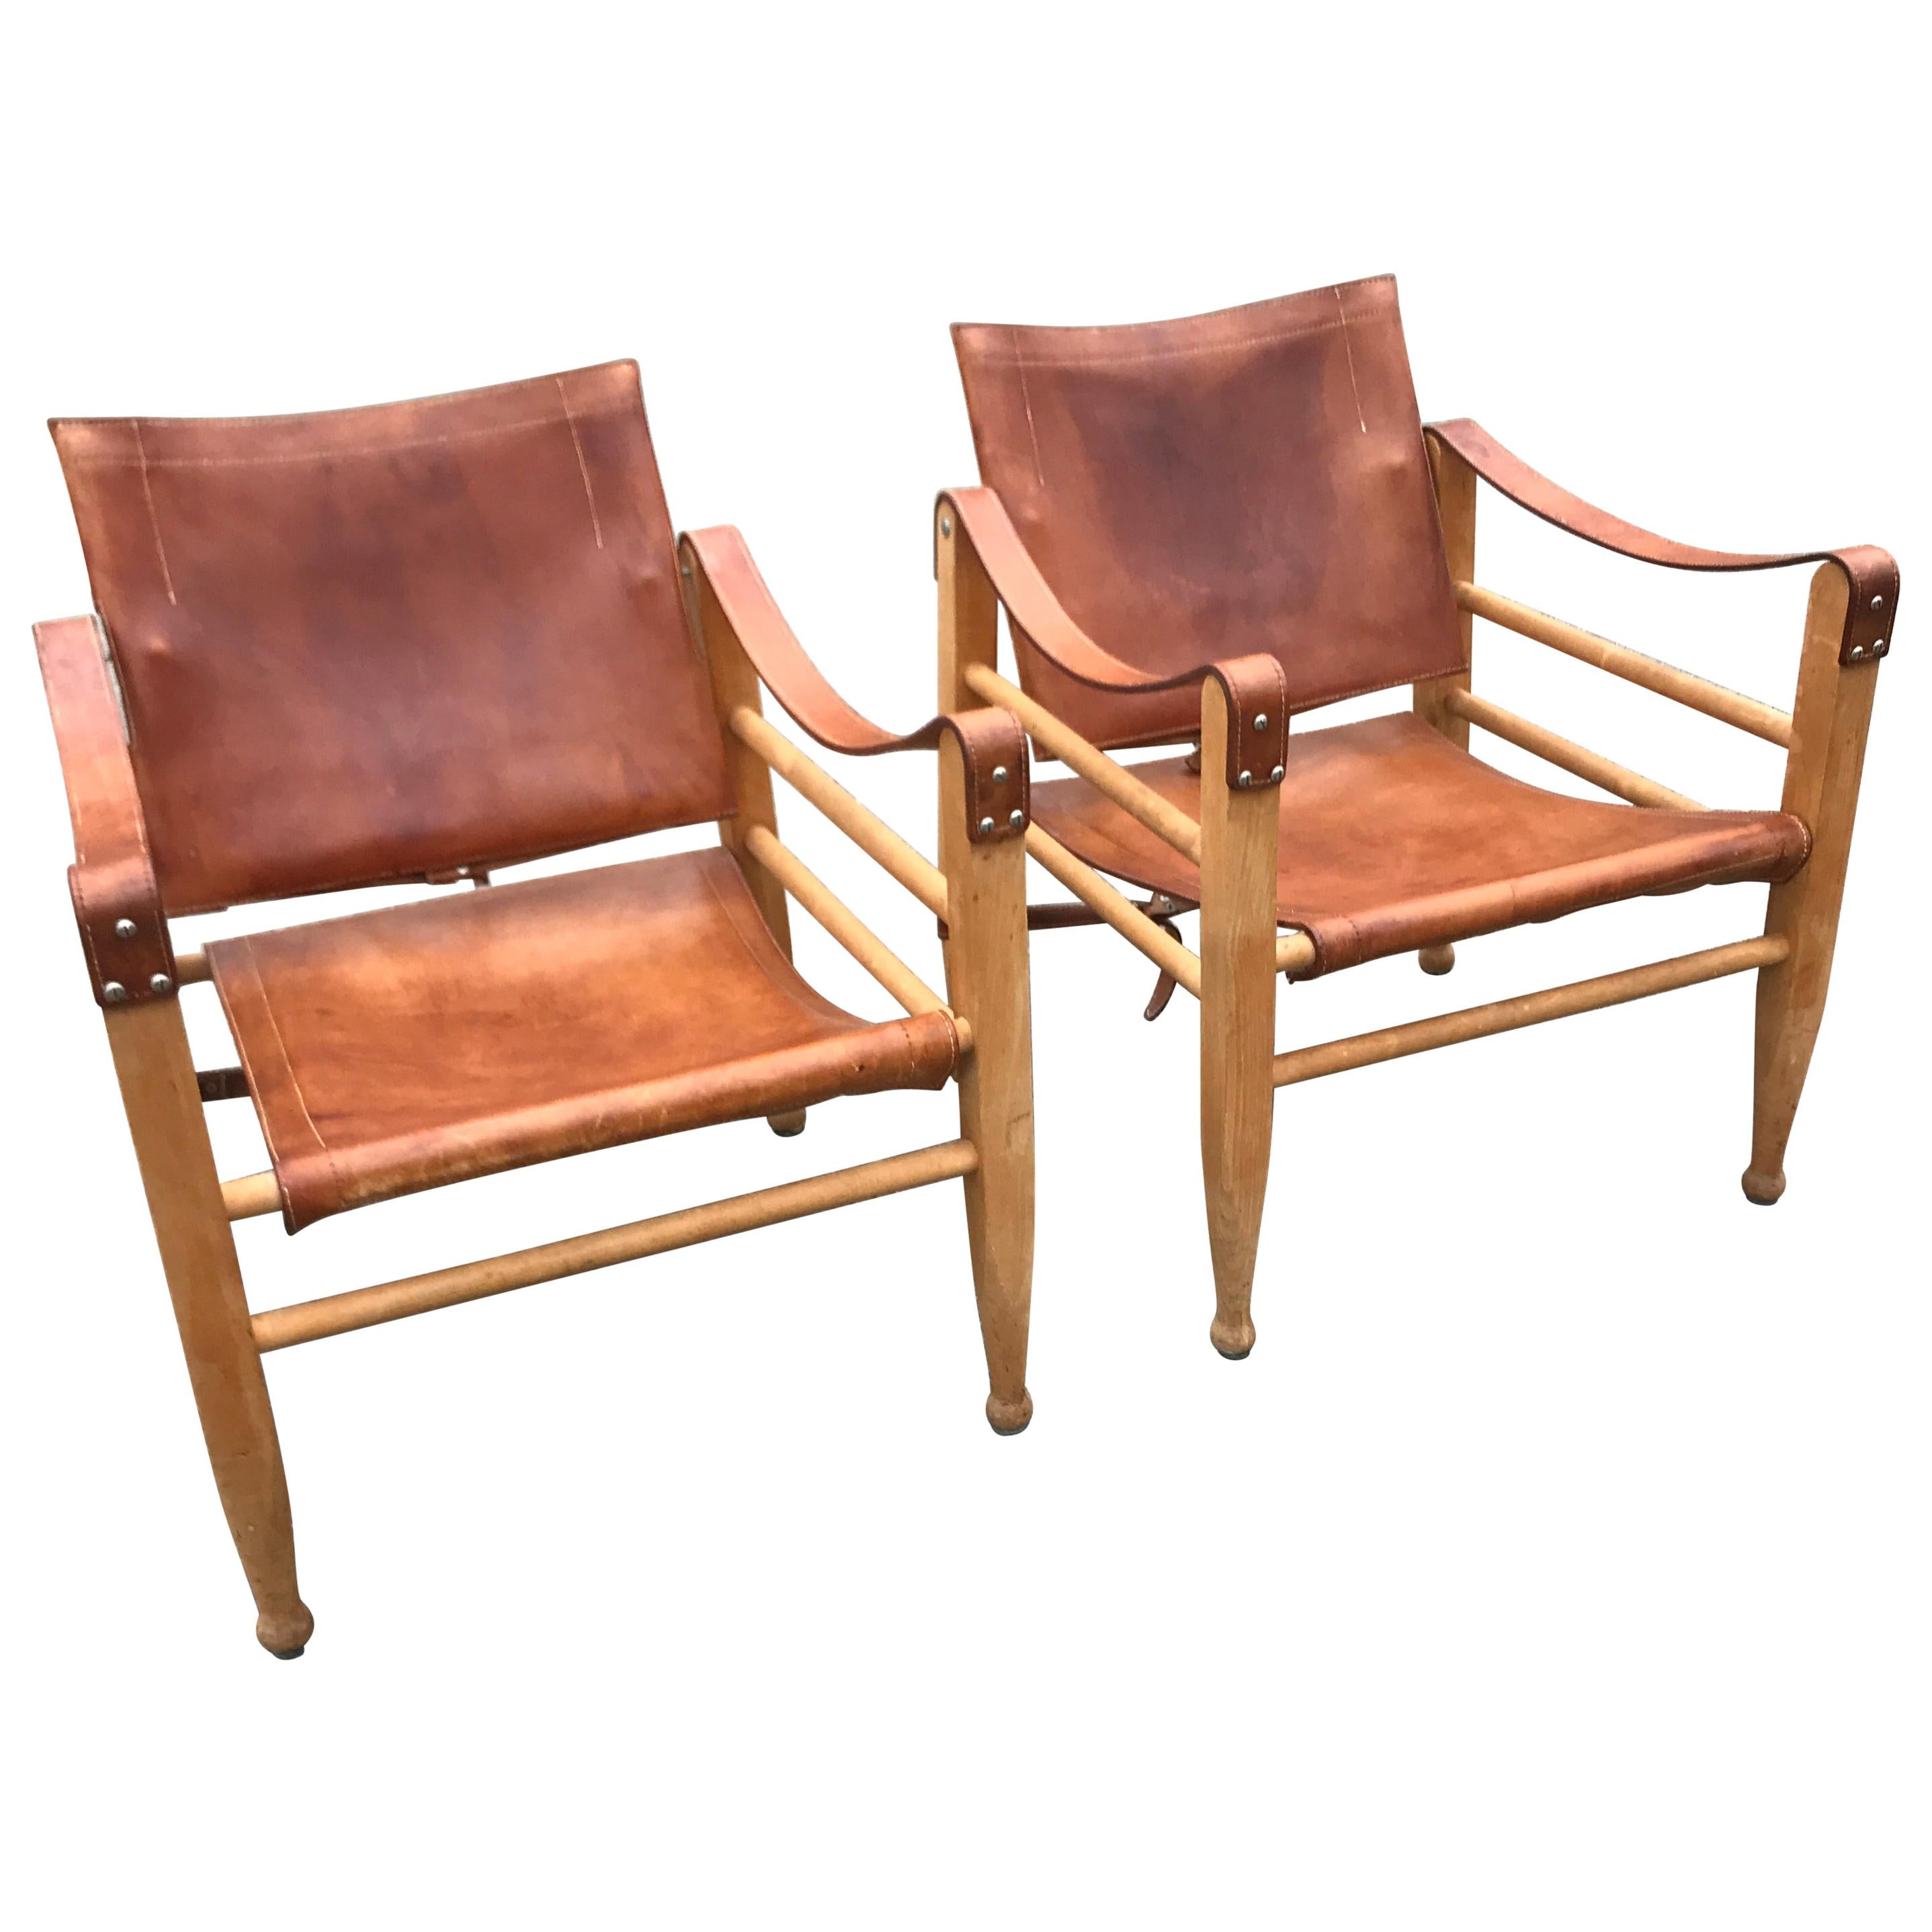 Aage Bruun and Son Safari Chairs in Patinated Tan Leather, Denmark, 1960